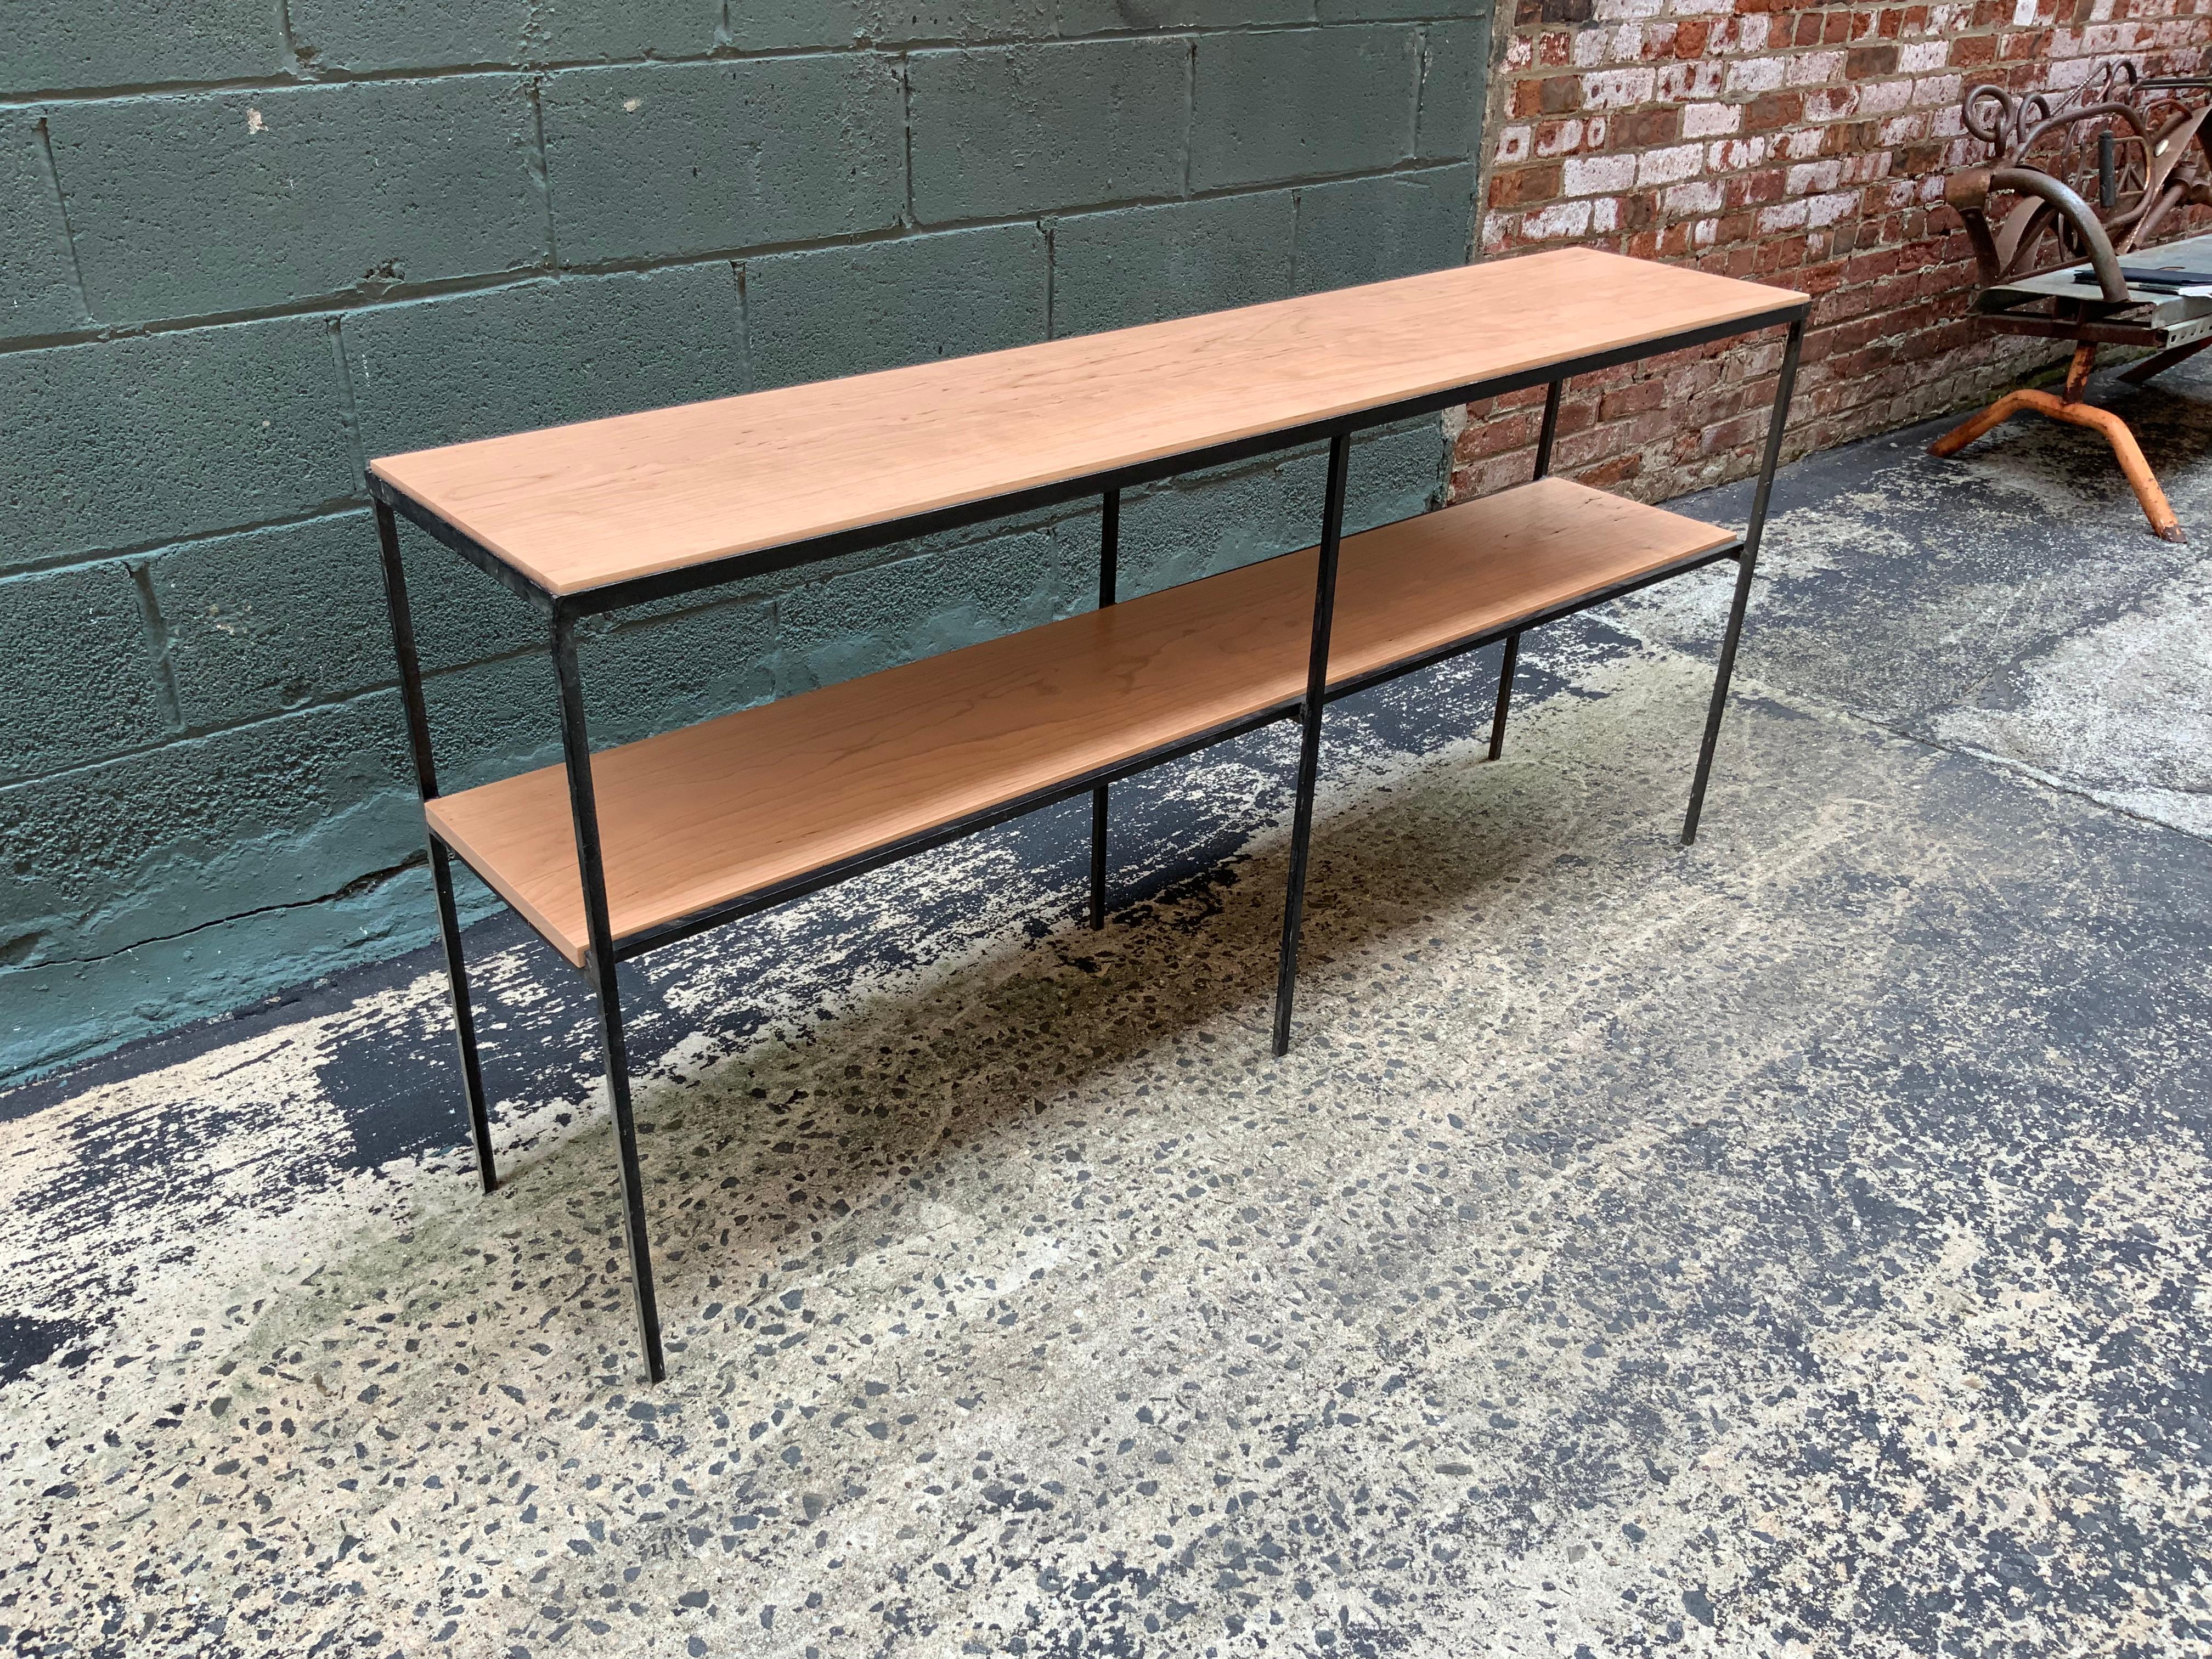 Free standing square iron rod with solid cherry shelving or room divider in the manner of Muriel Coleman for Pacific Iron or Vista. Beautiful grain in a natural finish, circa 1950-1960.

Measures: 13